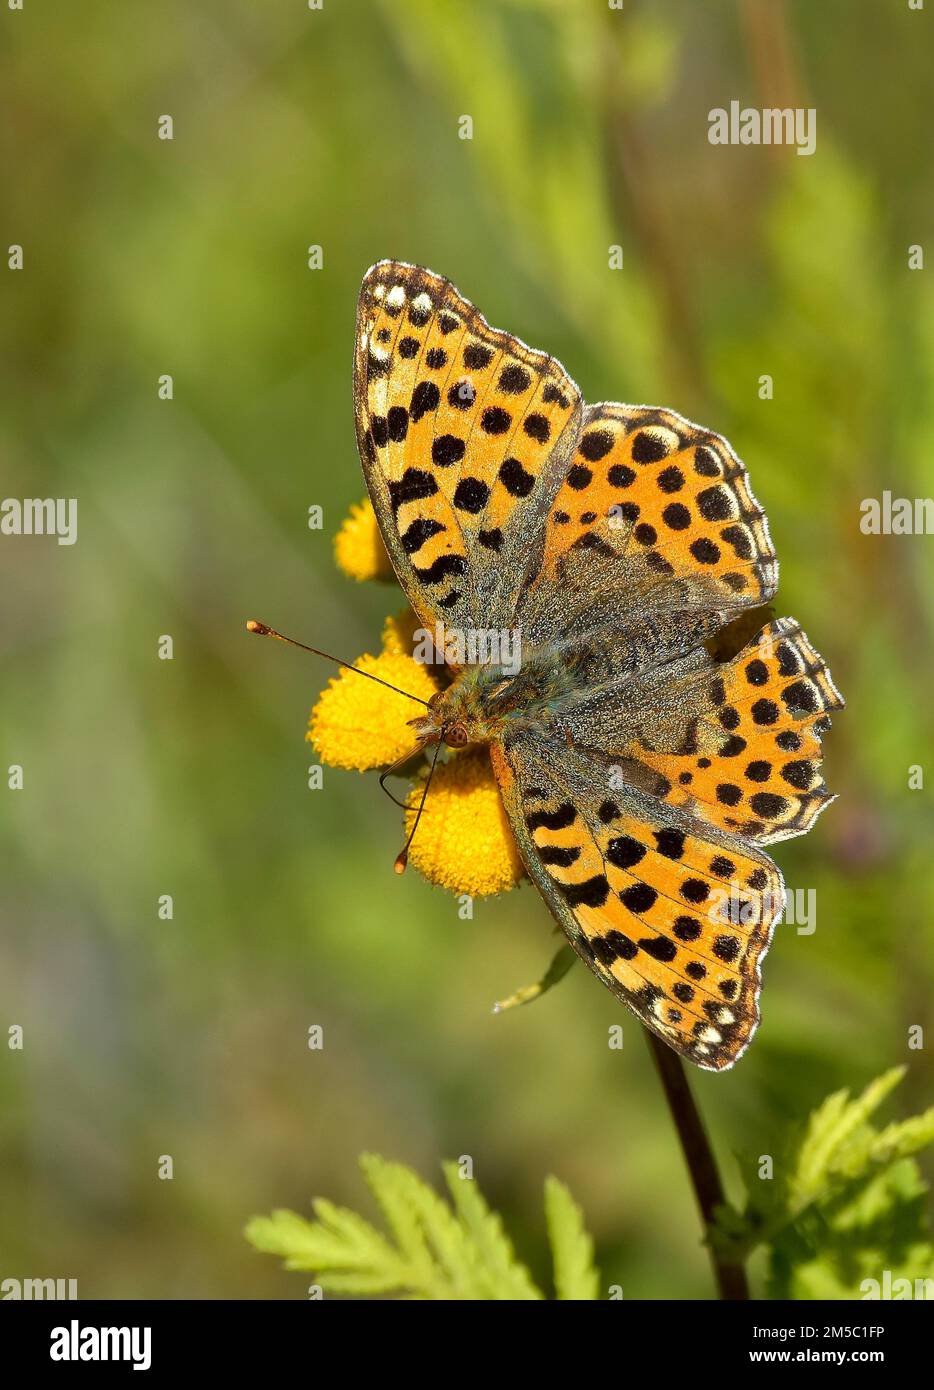 Queen of spain fritillary (Issoria lathonia) on tansy, Hesse, Germany Stock Photo